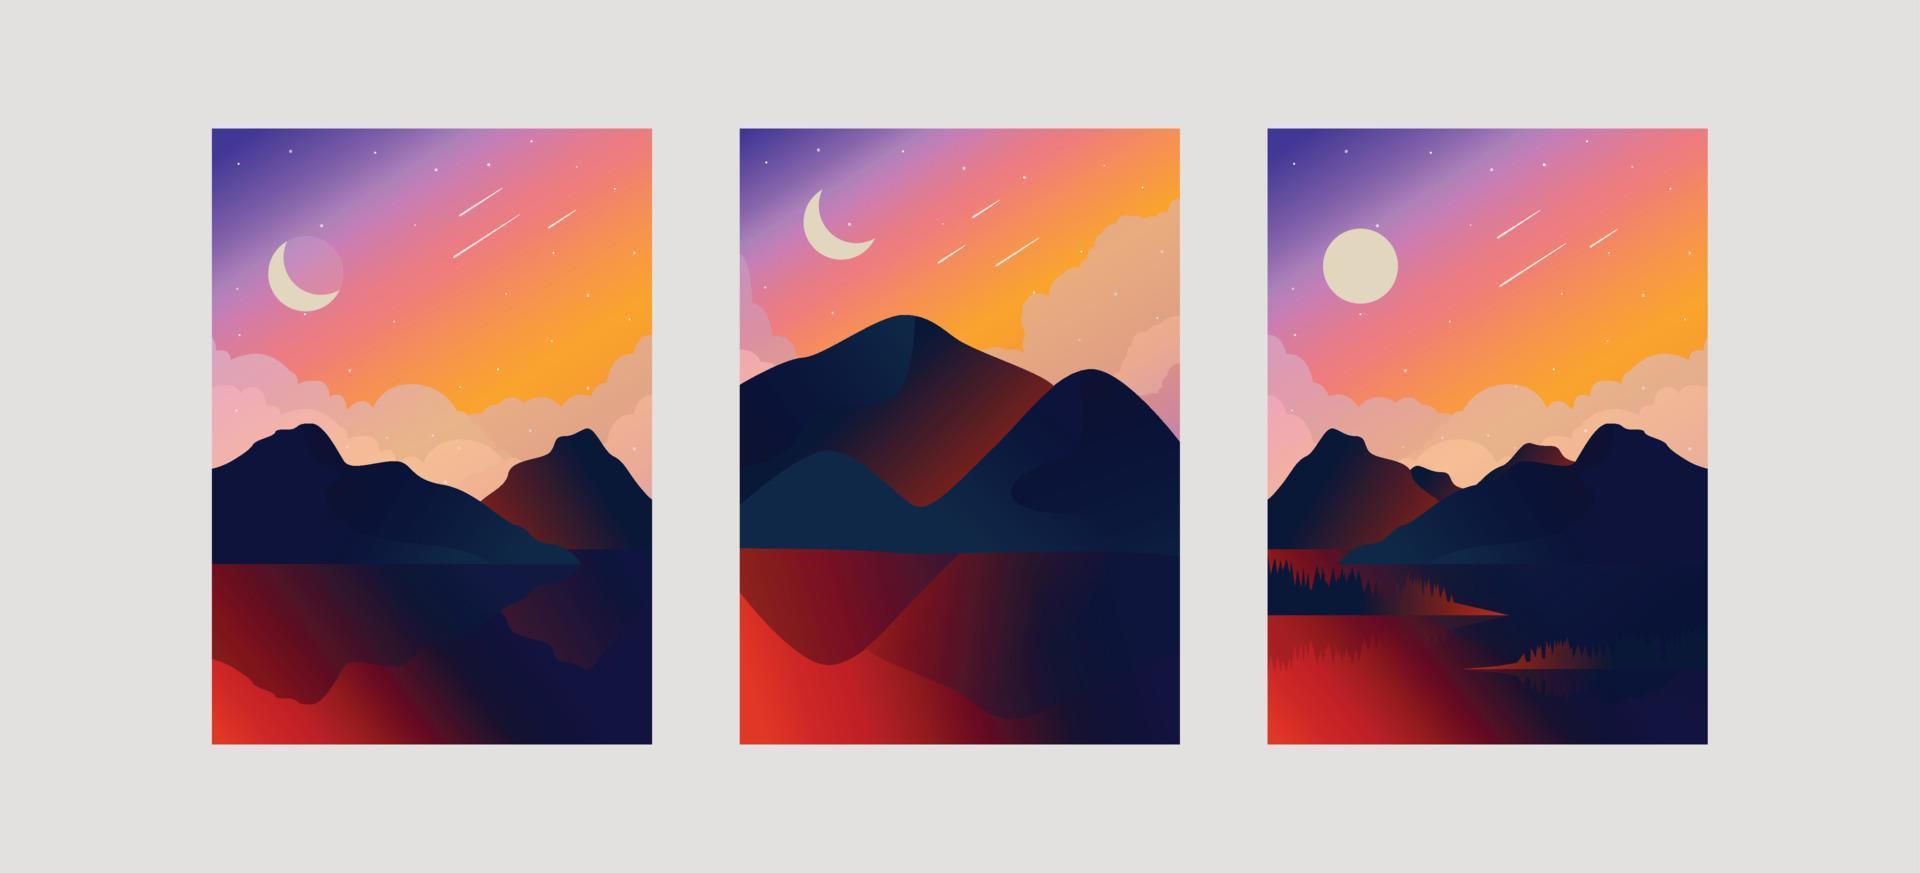 A series of three colorful vector landscapes with mountains, hills, and a lake. - Colorful, landscape